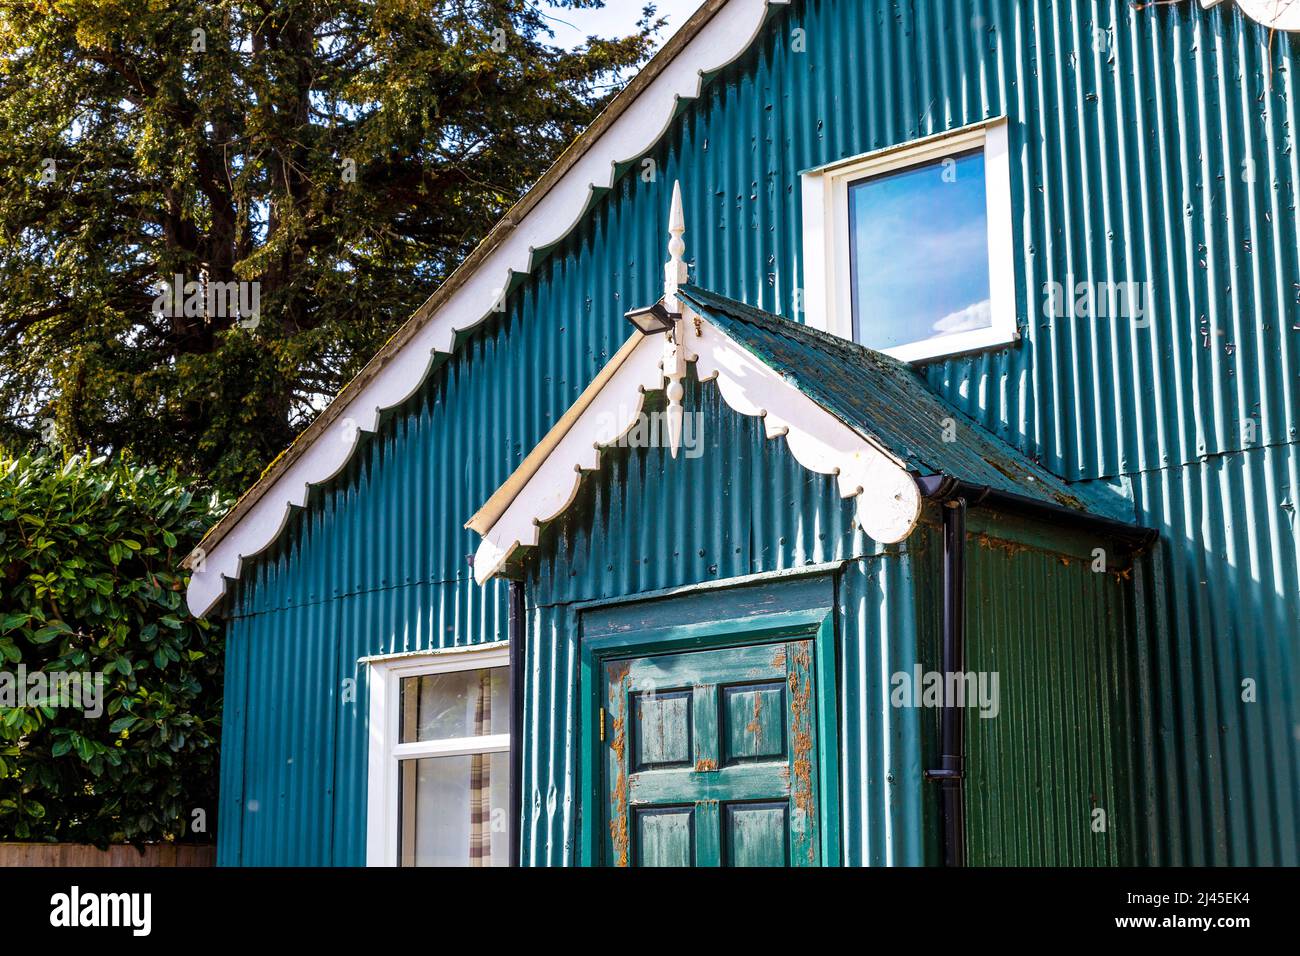 Teal blue metal-clad house in the village of Great Wymondley, Hertfordshire, UK Stock Photo